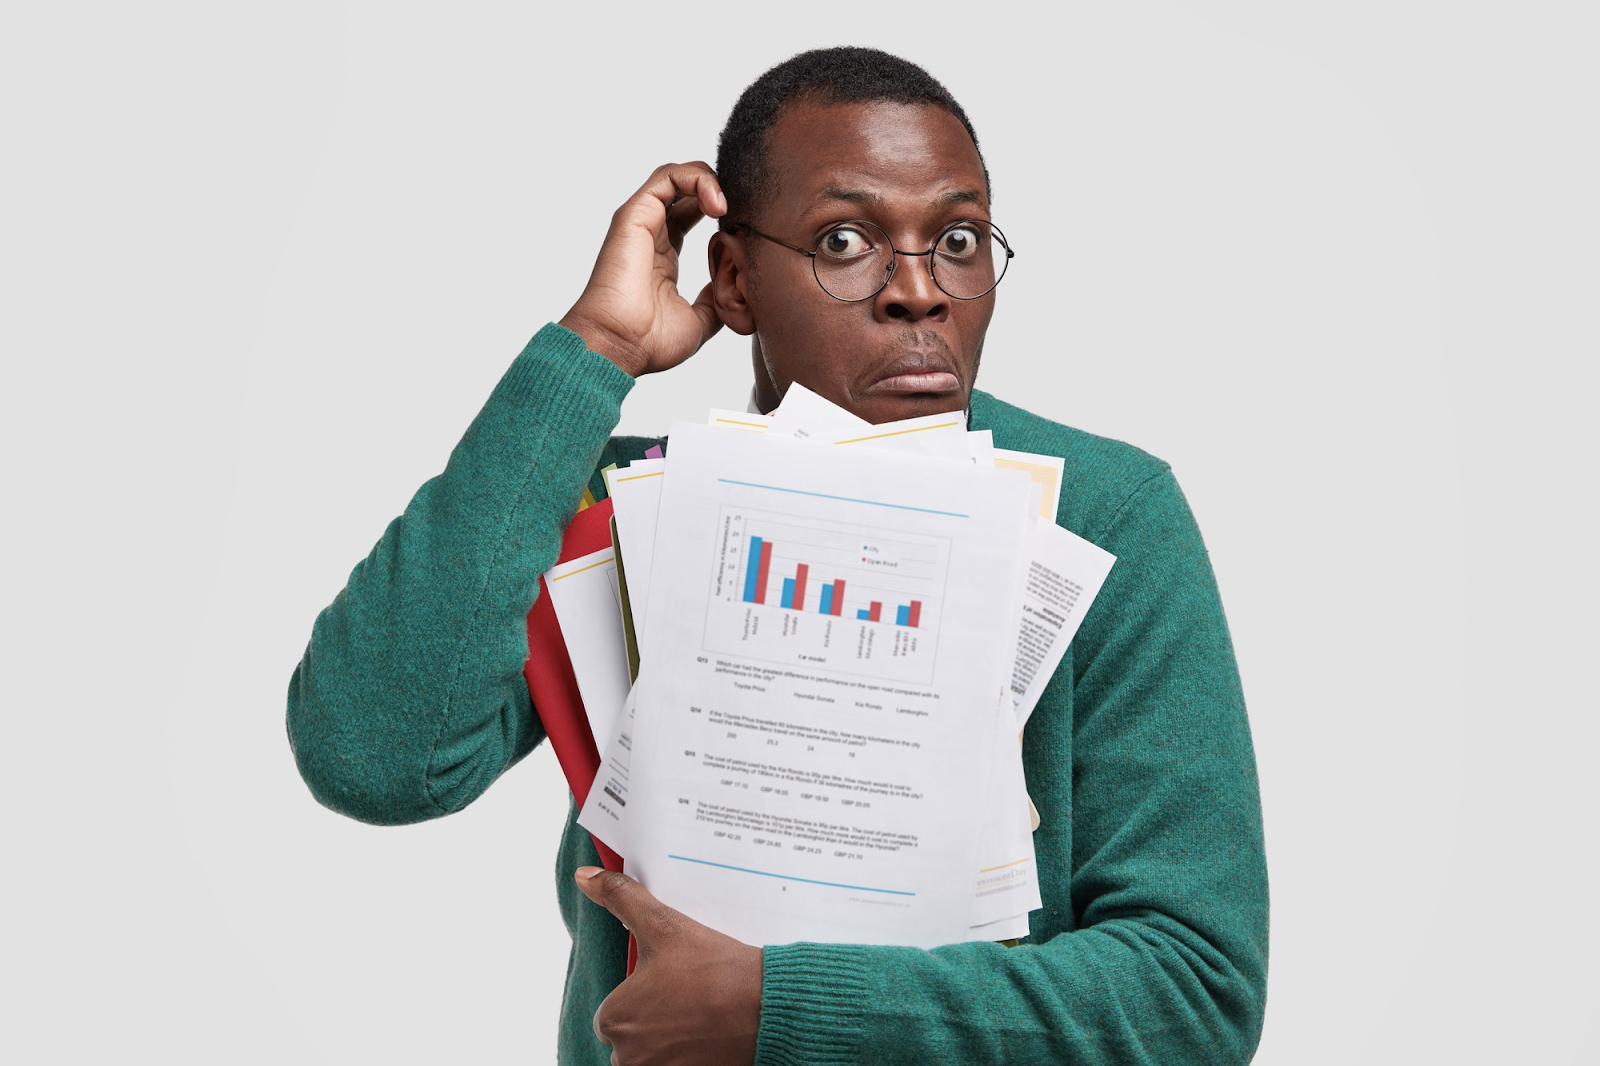 accounting advisory services pricing - man confused